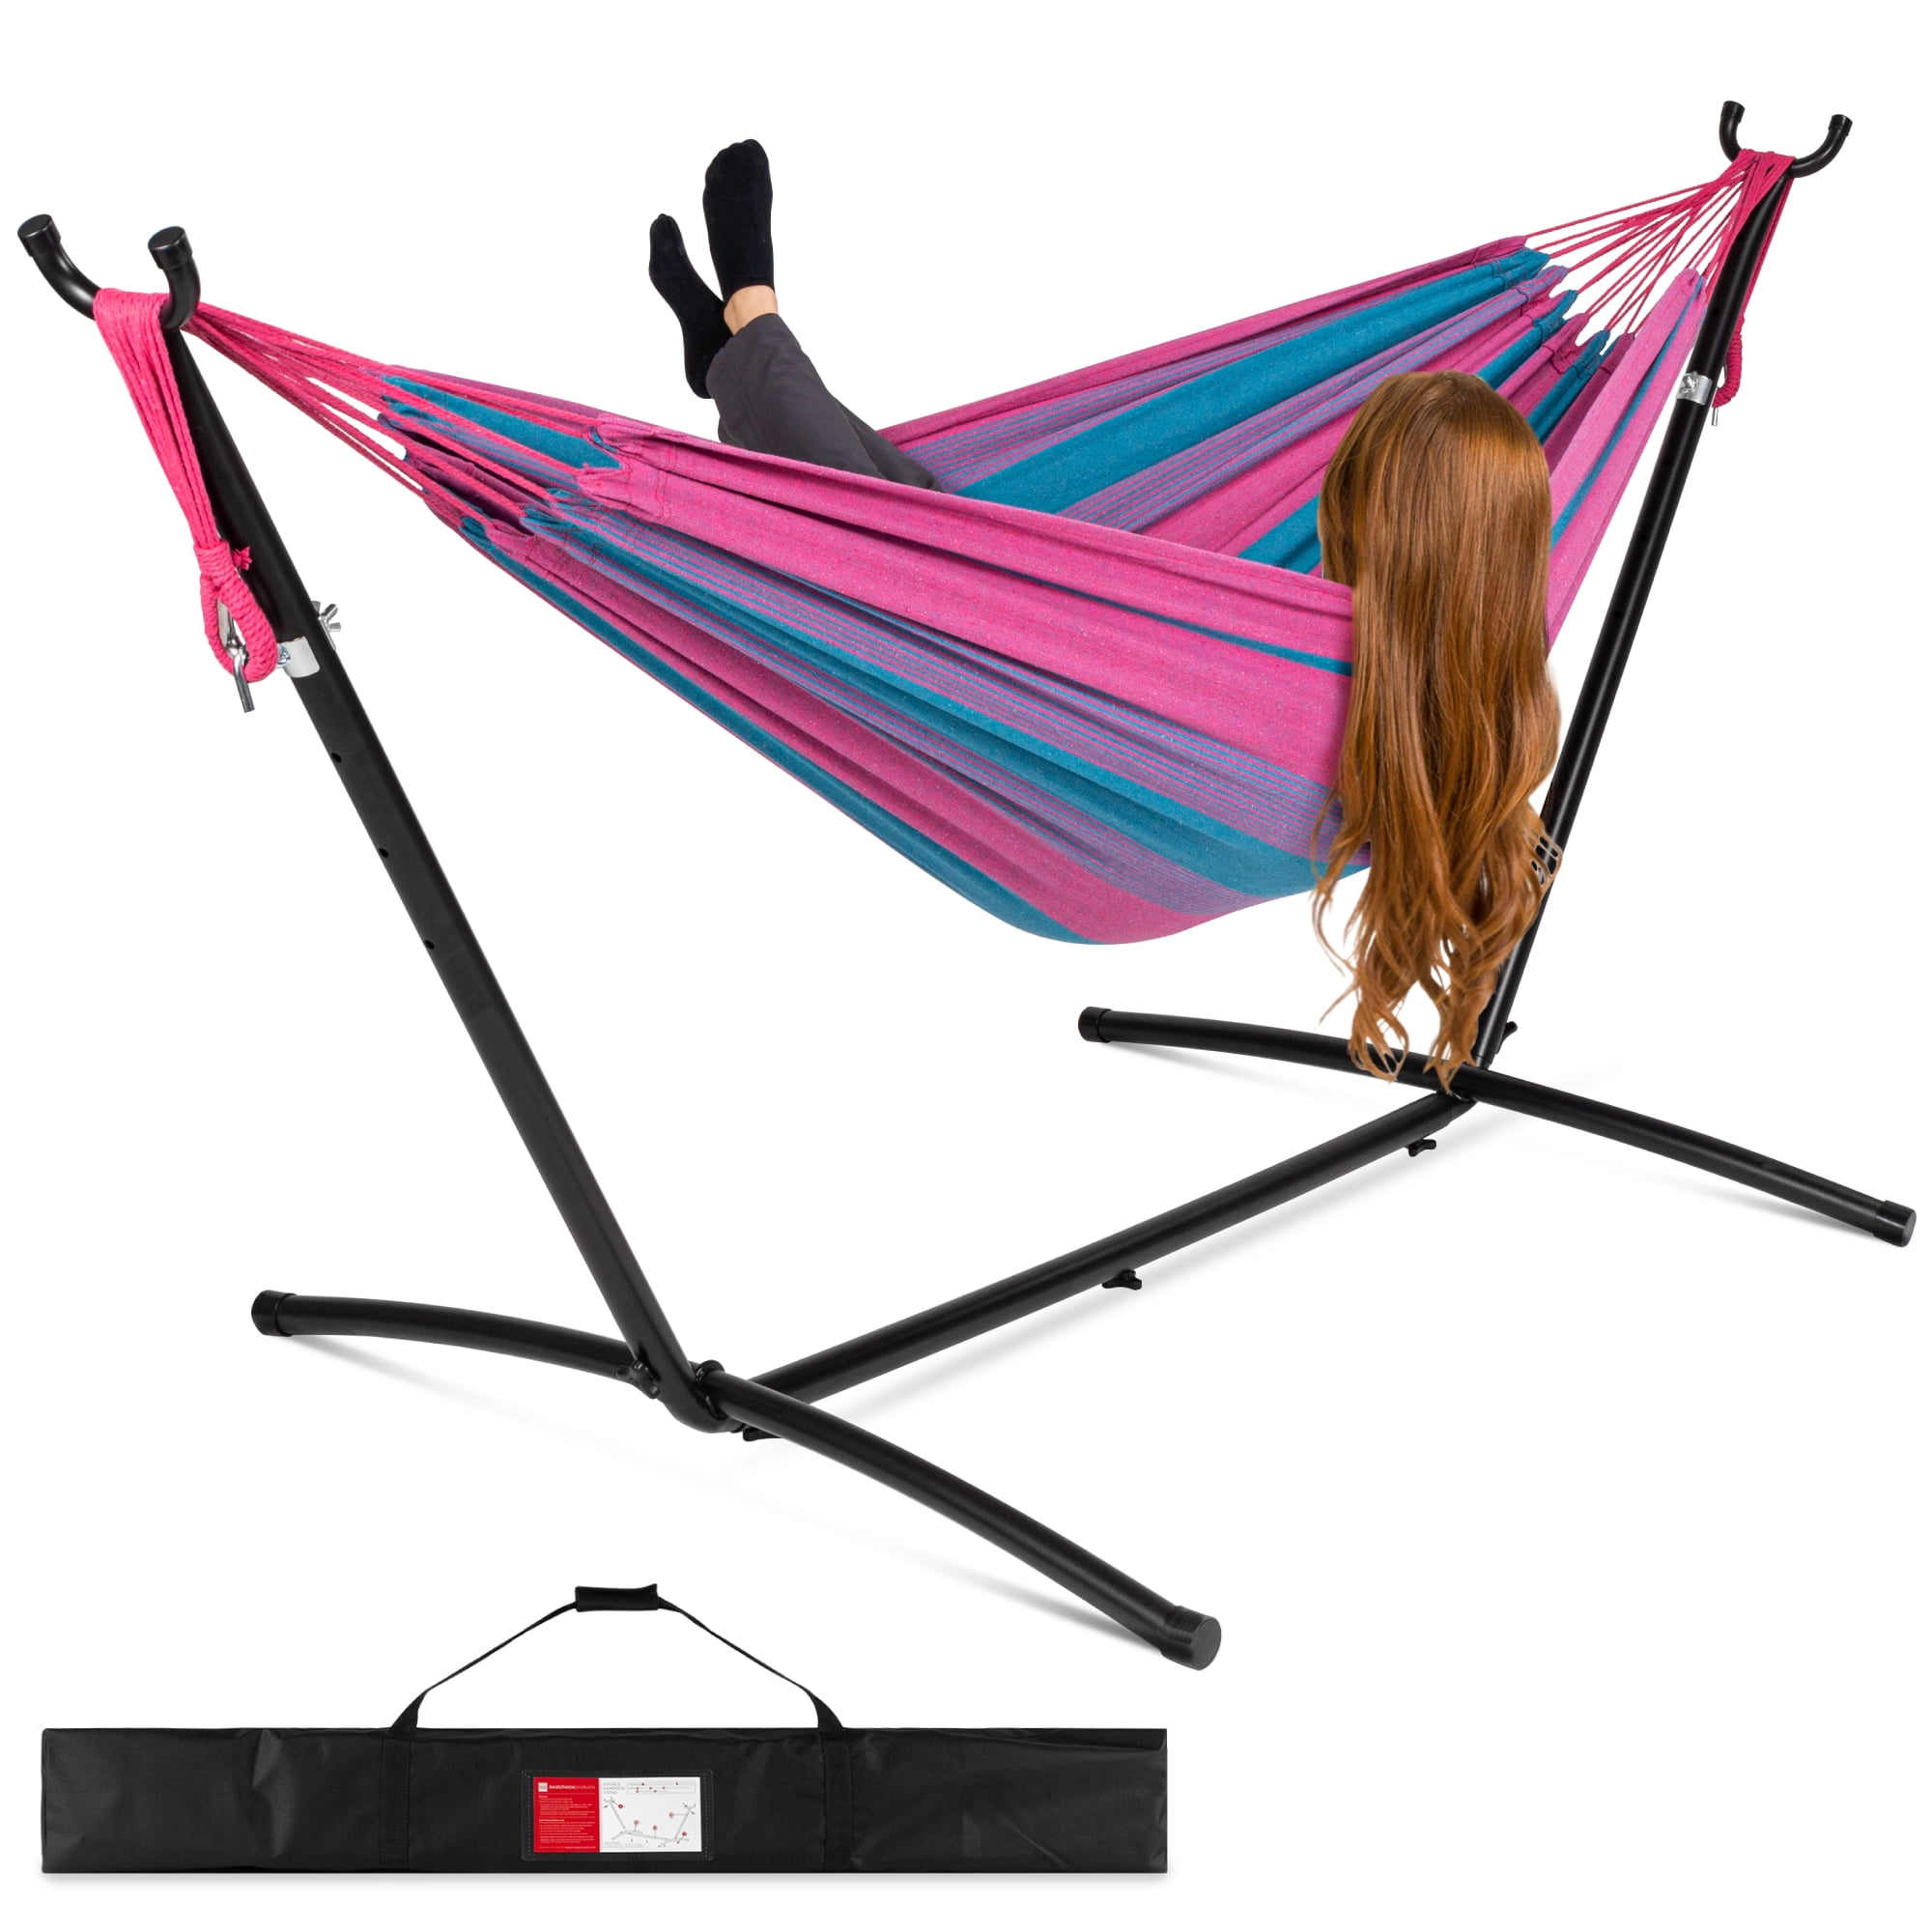 Best Choice Products 2-Person Brazilian-Style Cotton Double Hammock with Stand Set w/ Carrying Bag - Aster